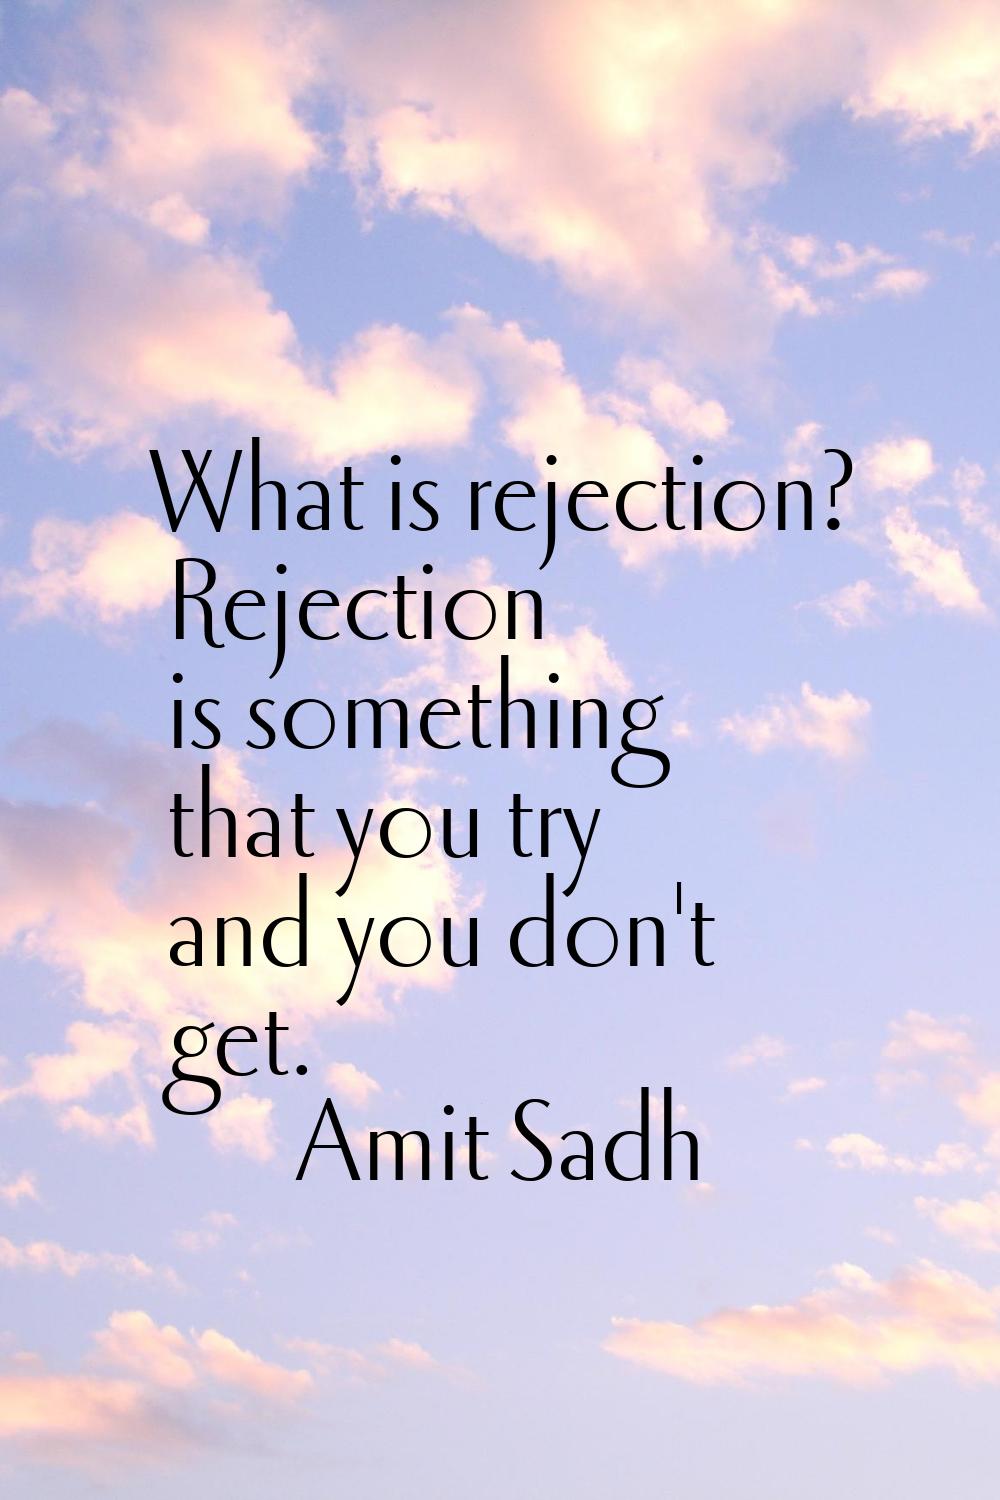 What is rejection? Rejection is something that you try and you don't get.